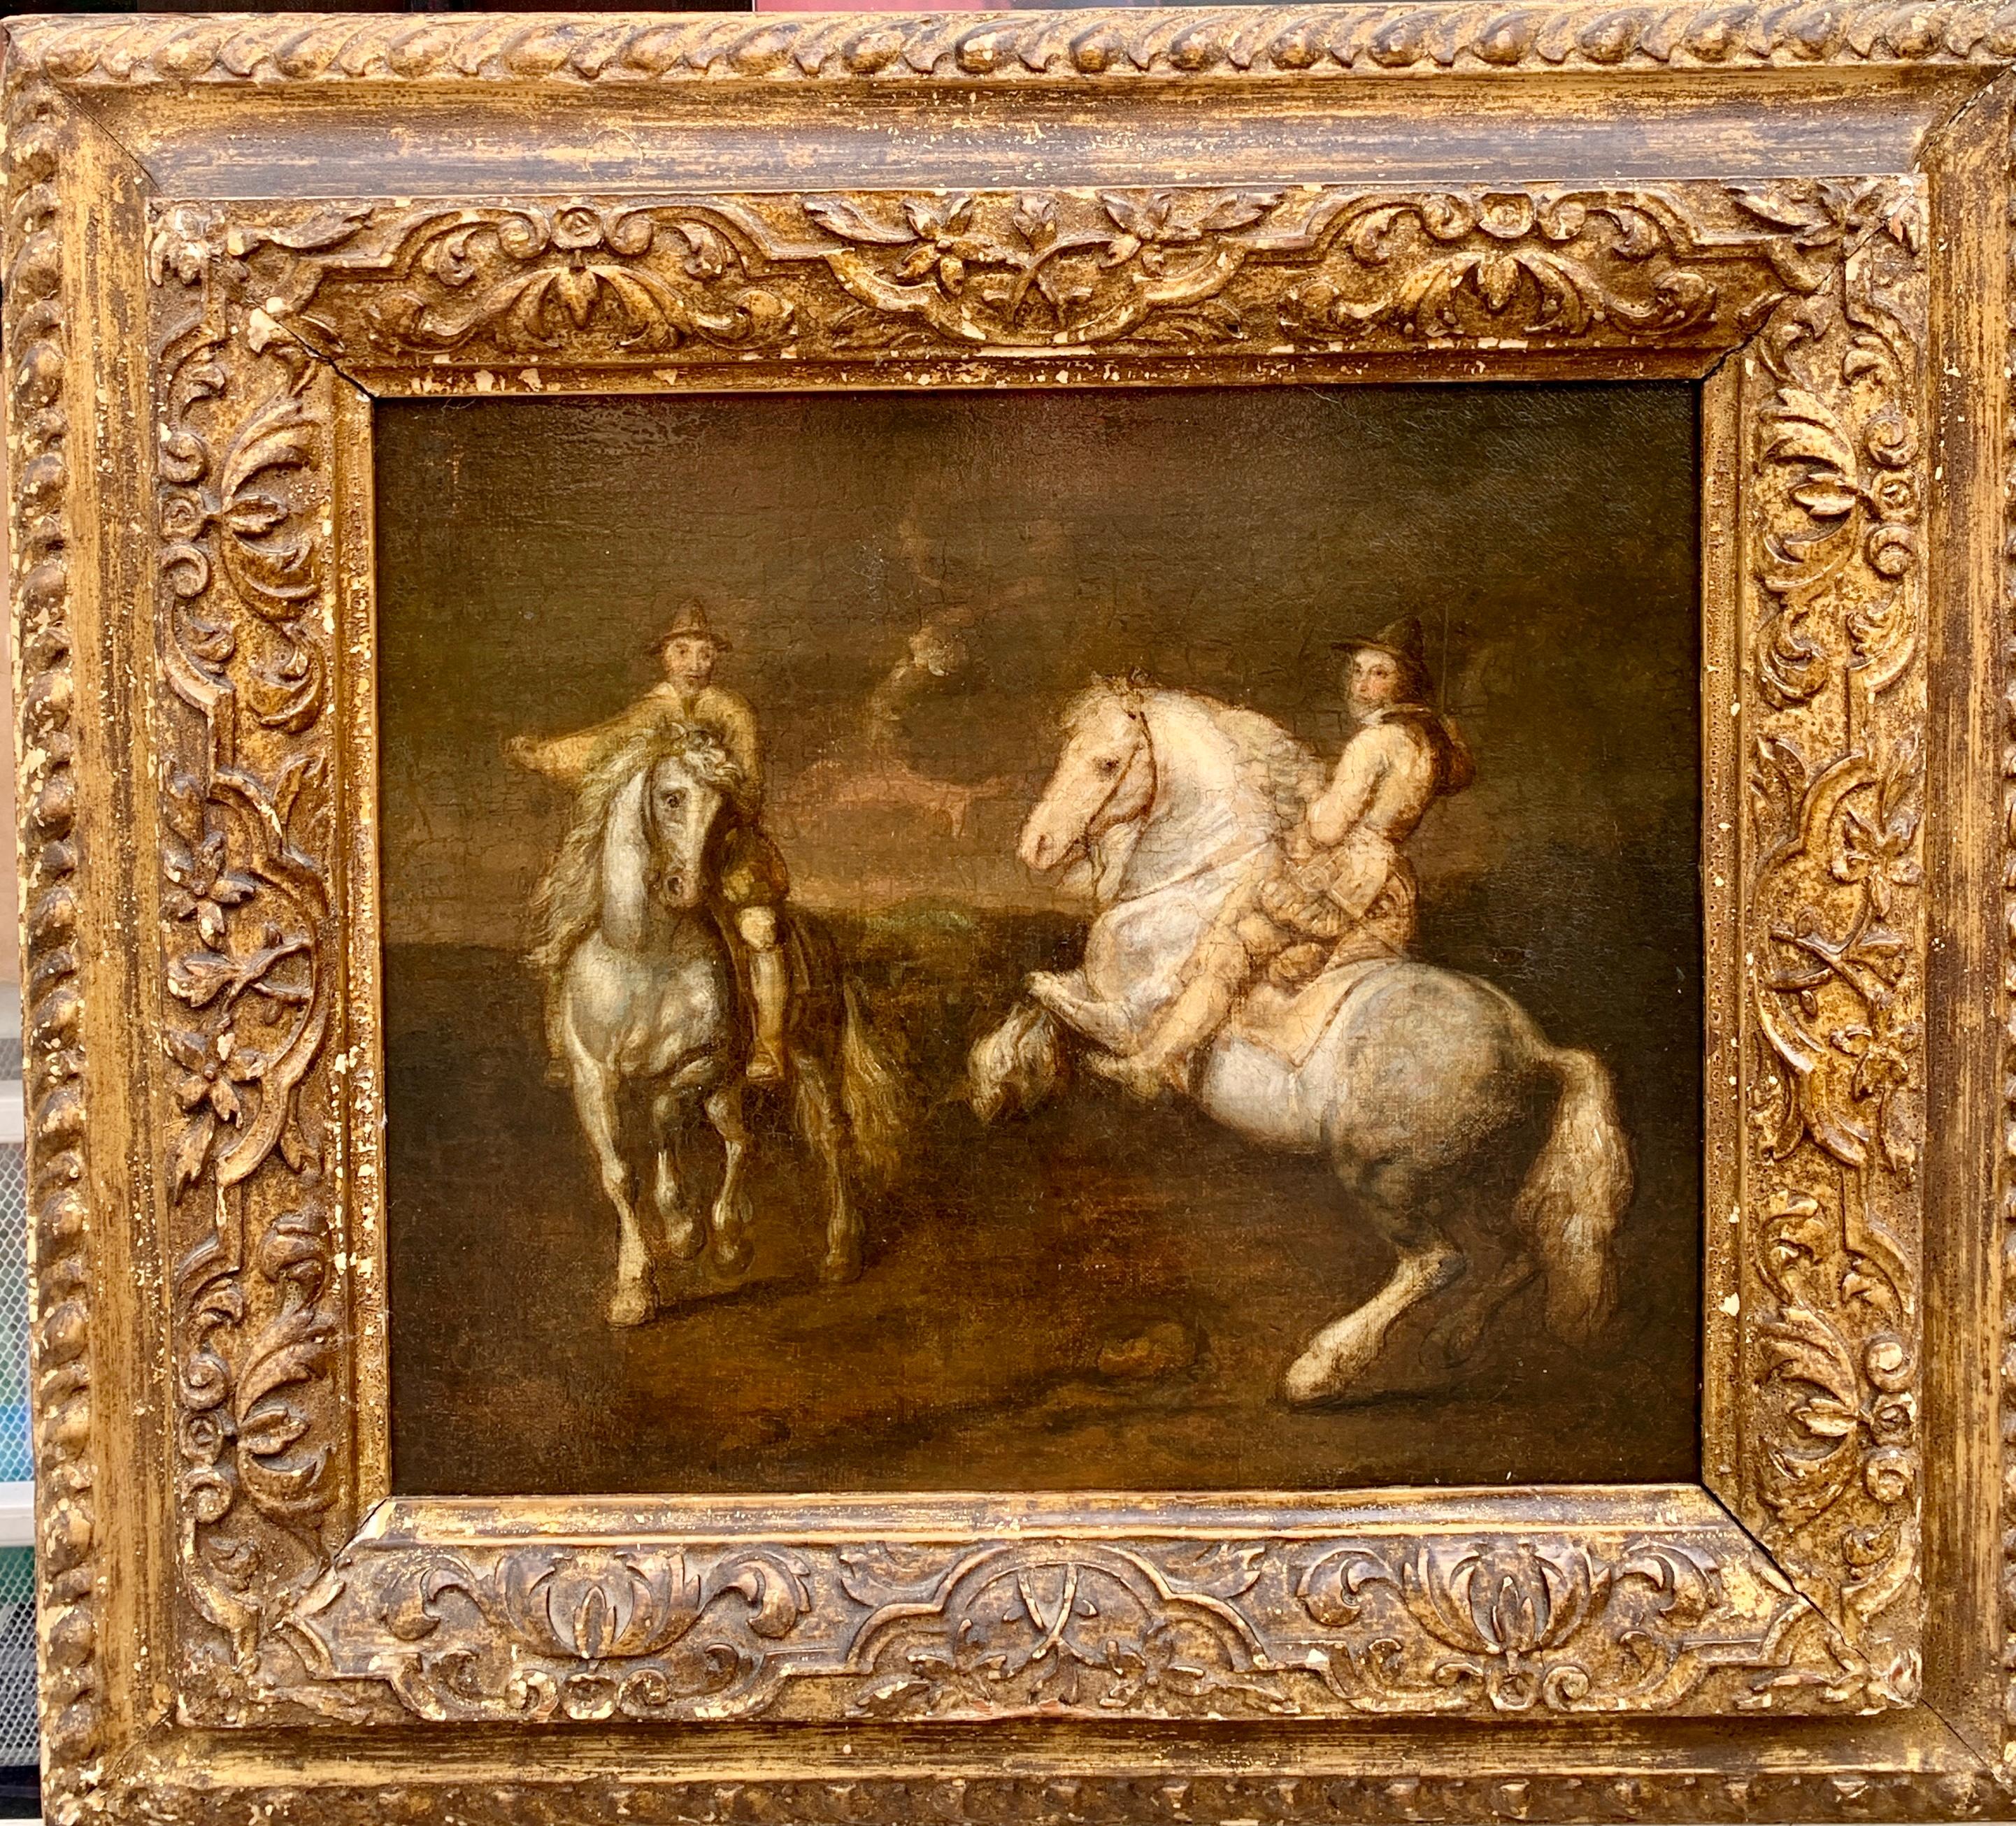 17th century follower of Rubens, two military men on horse back in a landscape